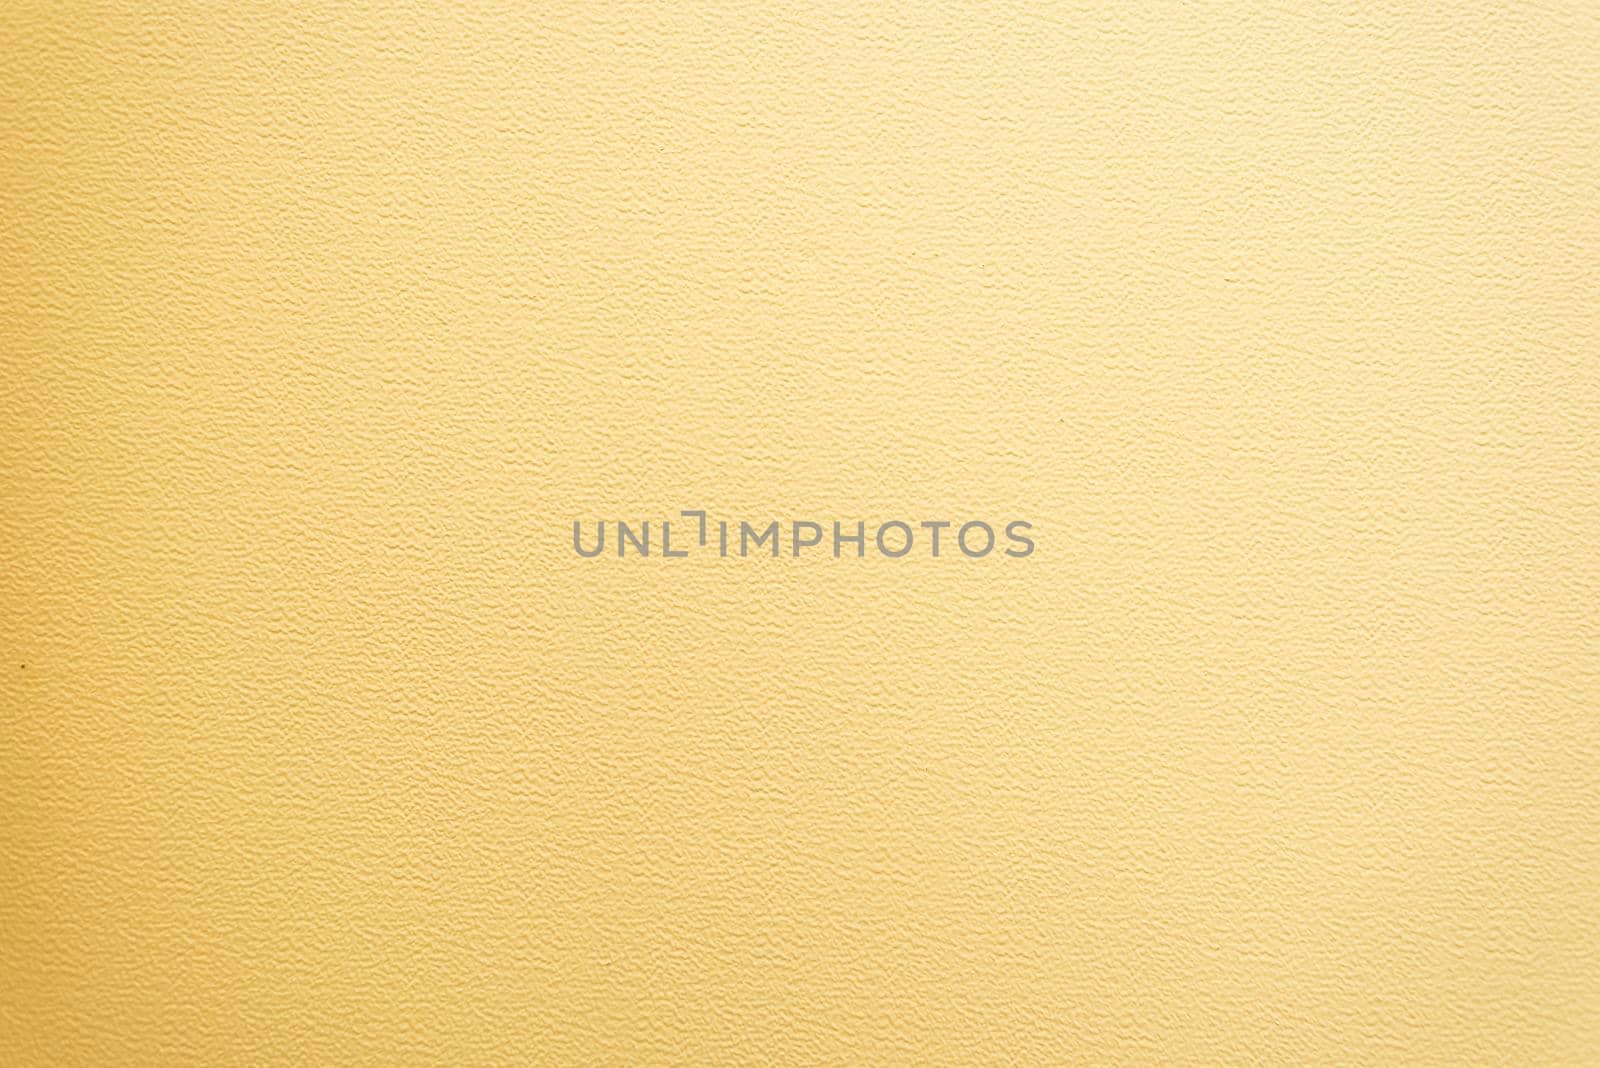 A light yellow wall texture abstract background by Antonelli